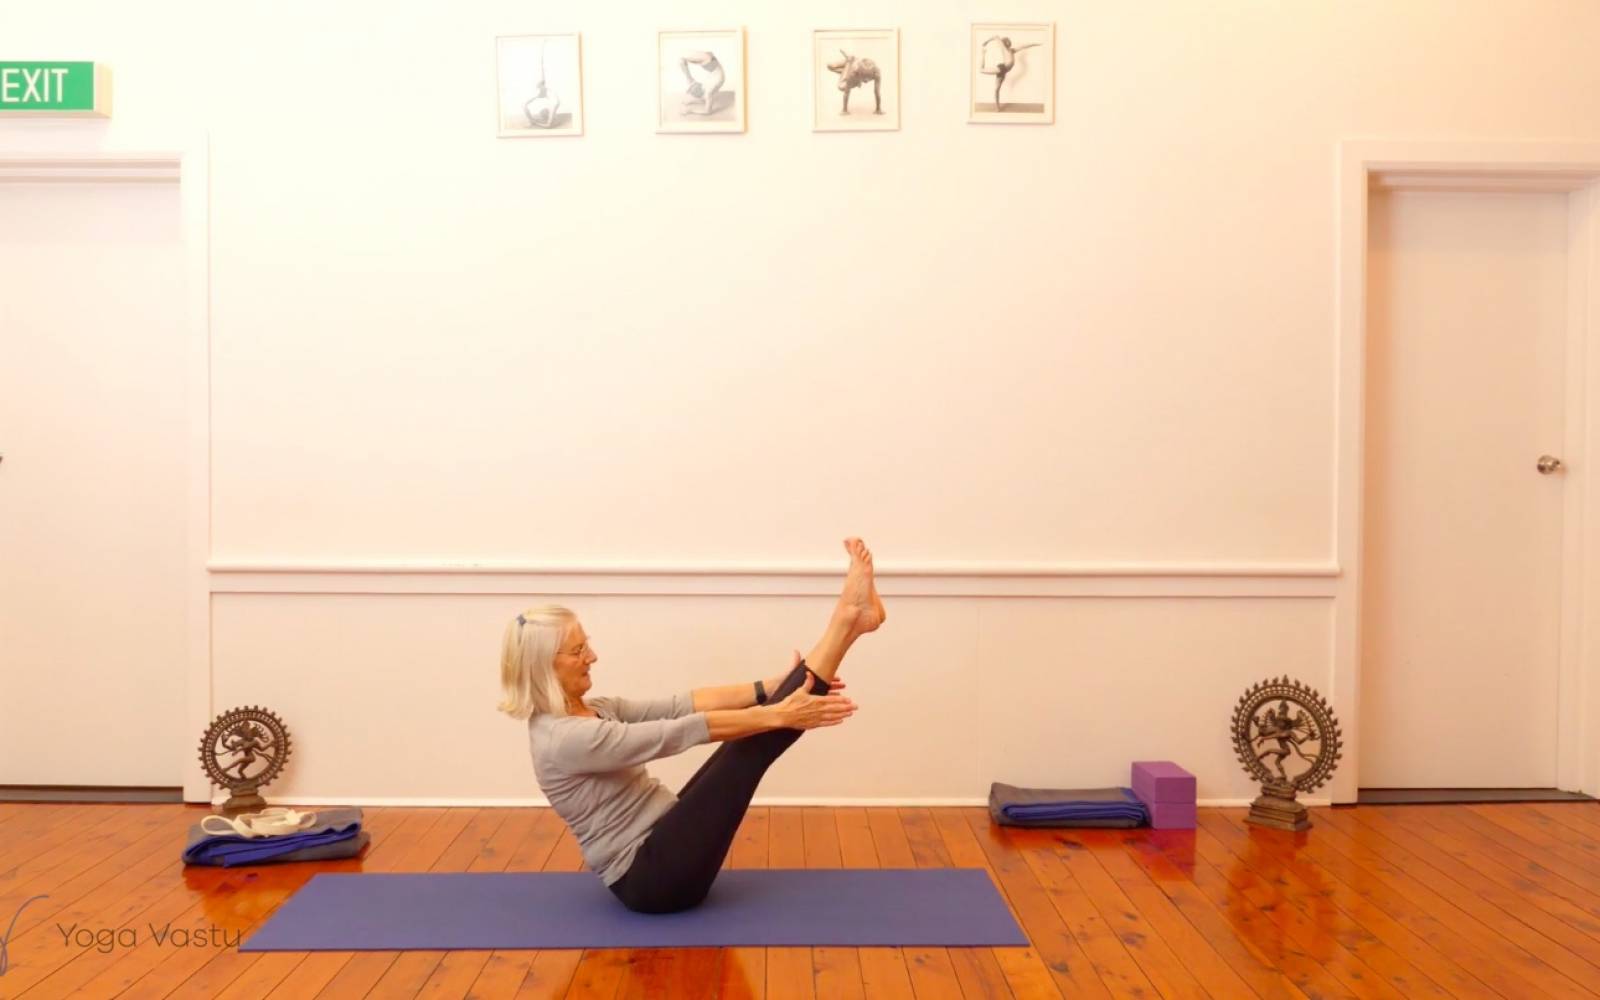 Inner thigh release with a yoga block - 5 min fix to improve butterfly pose